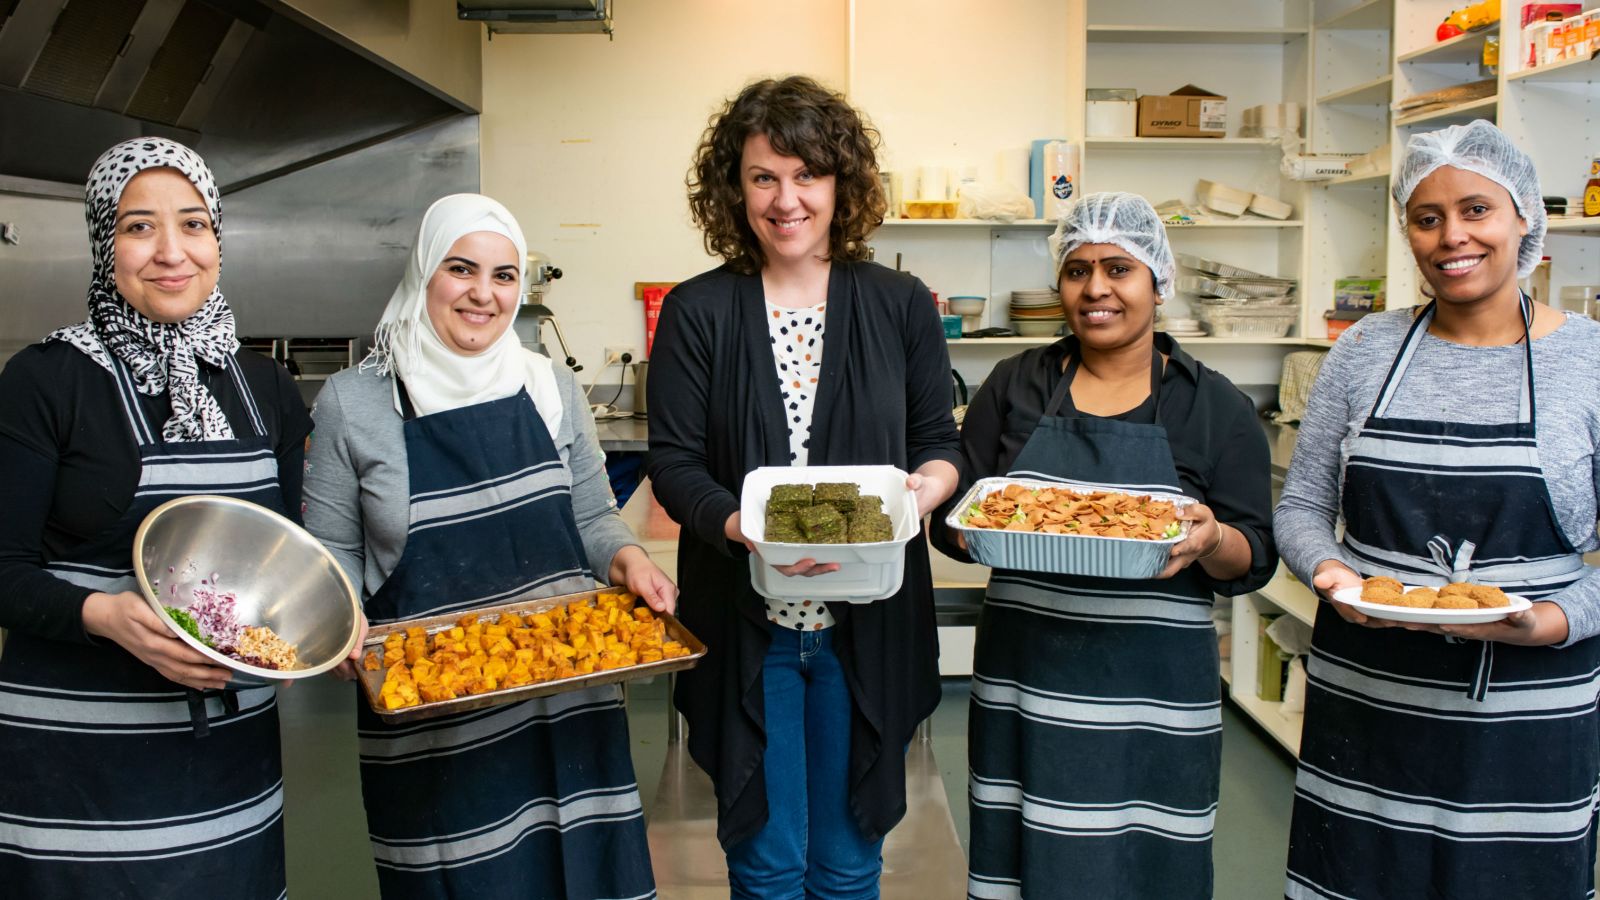 Rebecca Stewart and chefs from her business Pomegranate Kitchen present a range of traditional Middle Eastern cuisine.